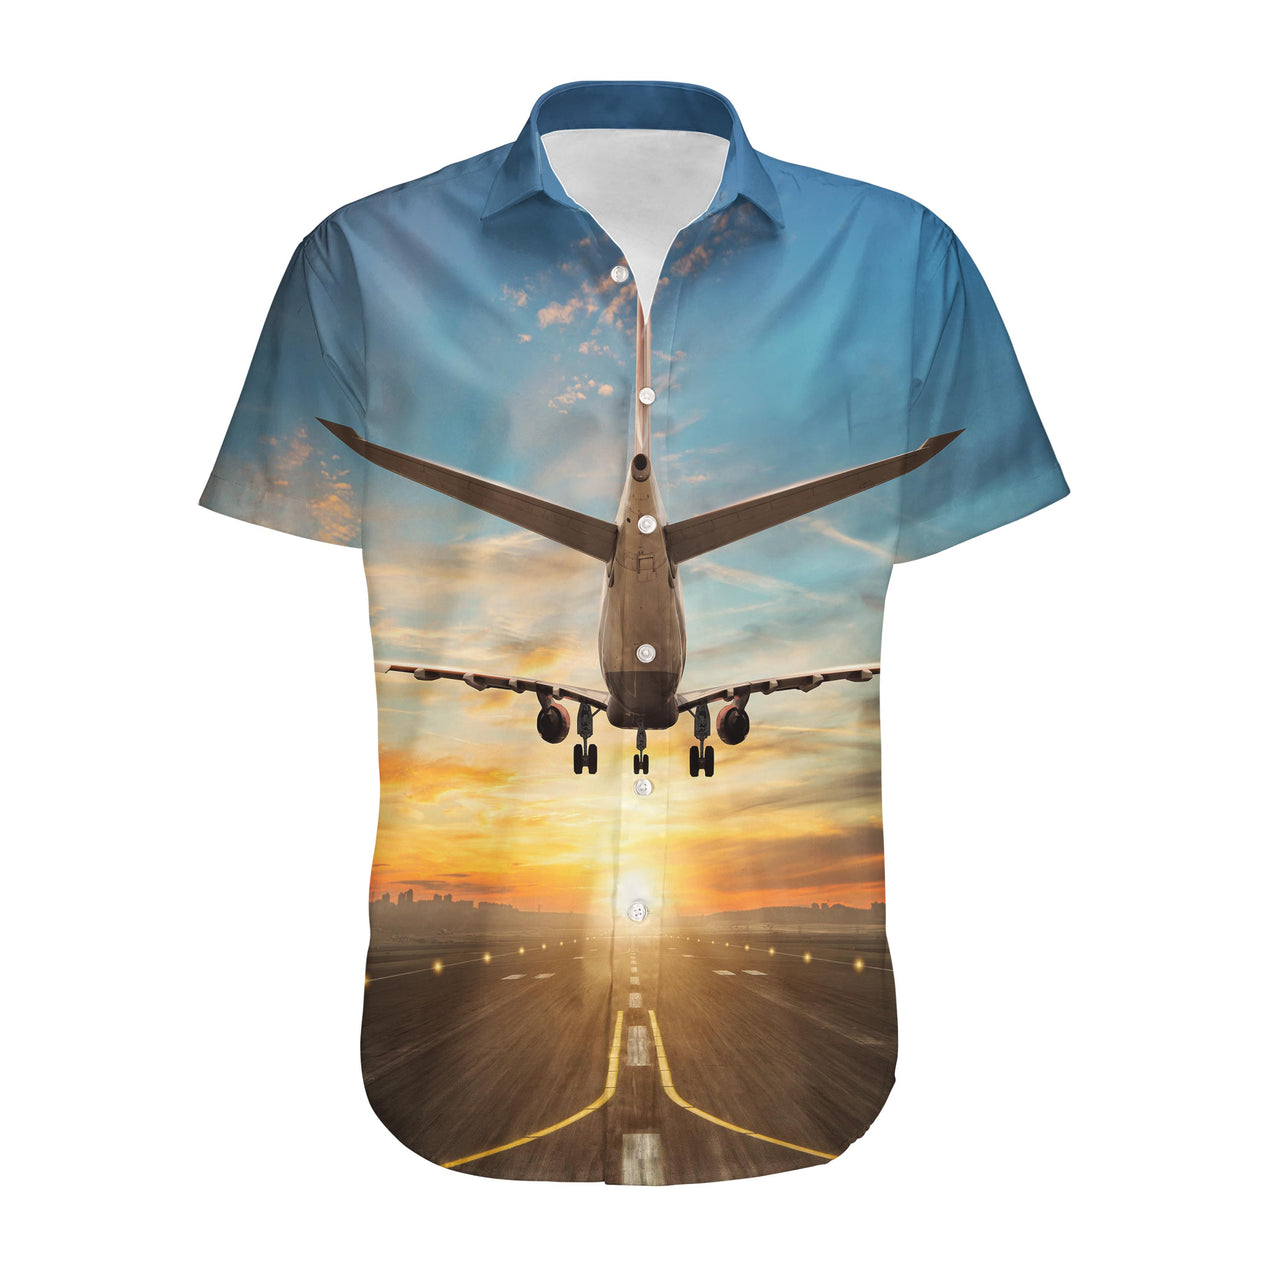 Airplane over Runway Towards the Sunrise Designed 3D Shirts